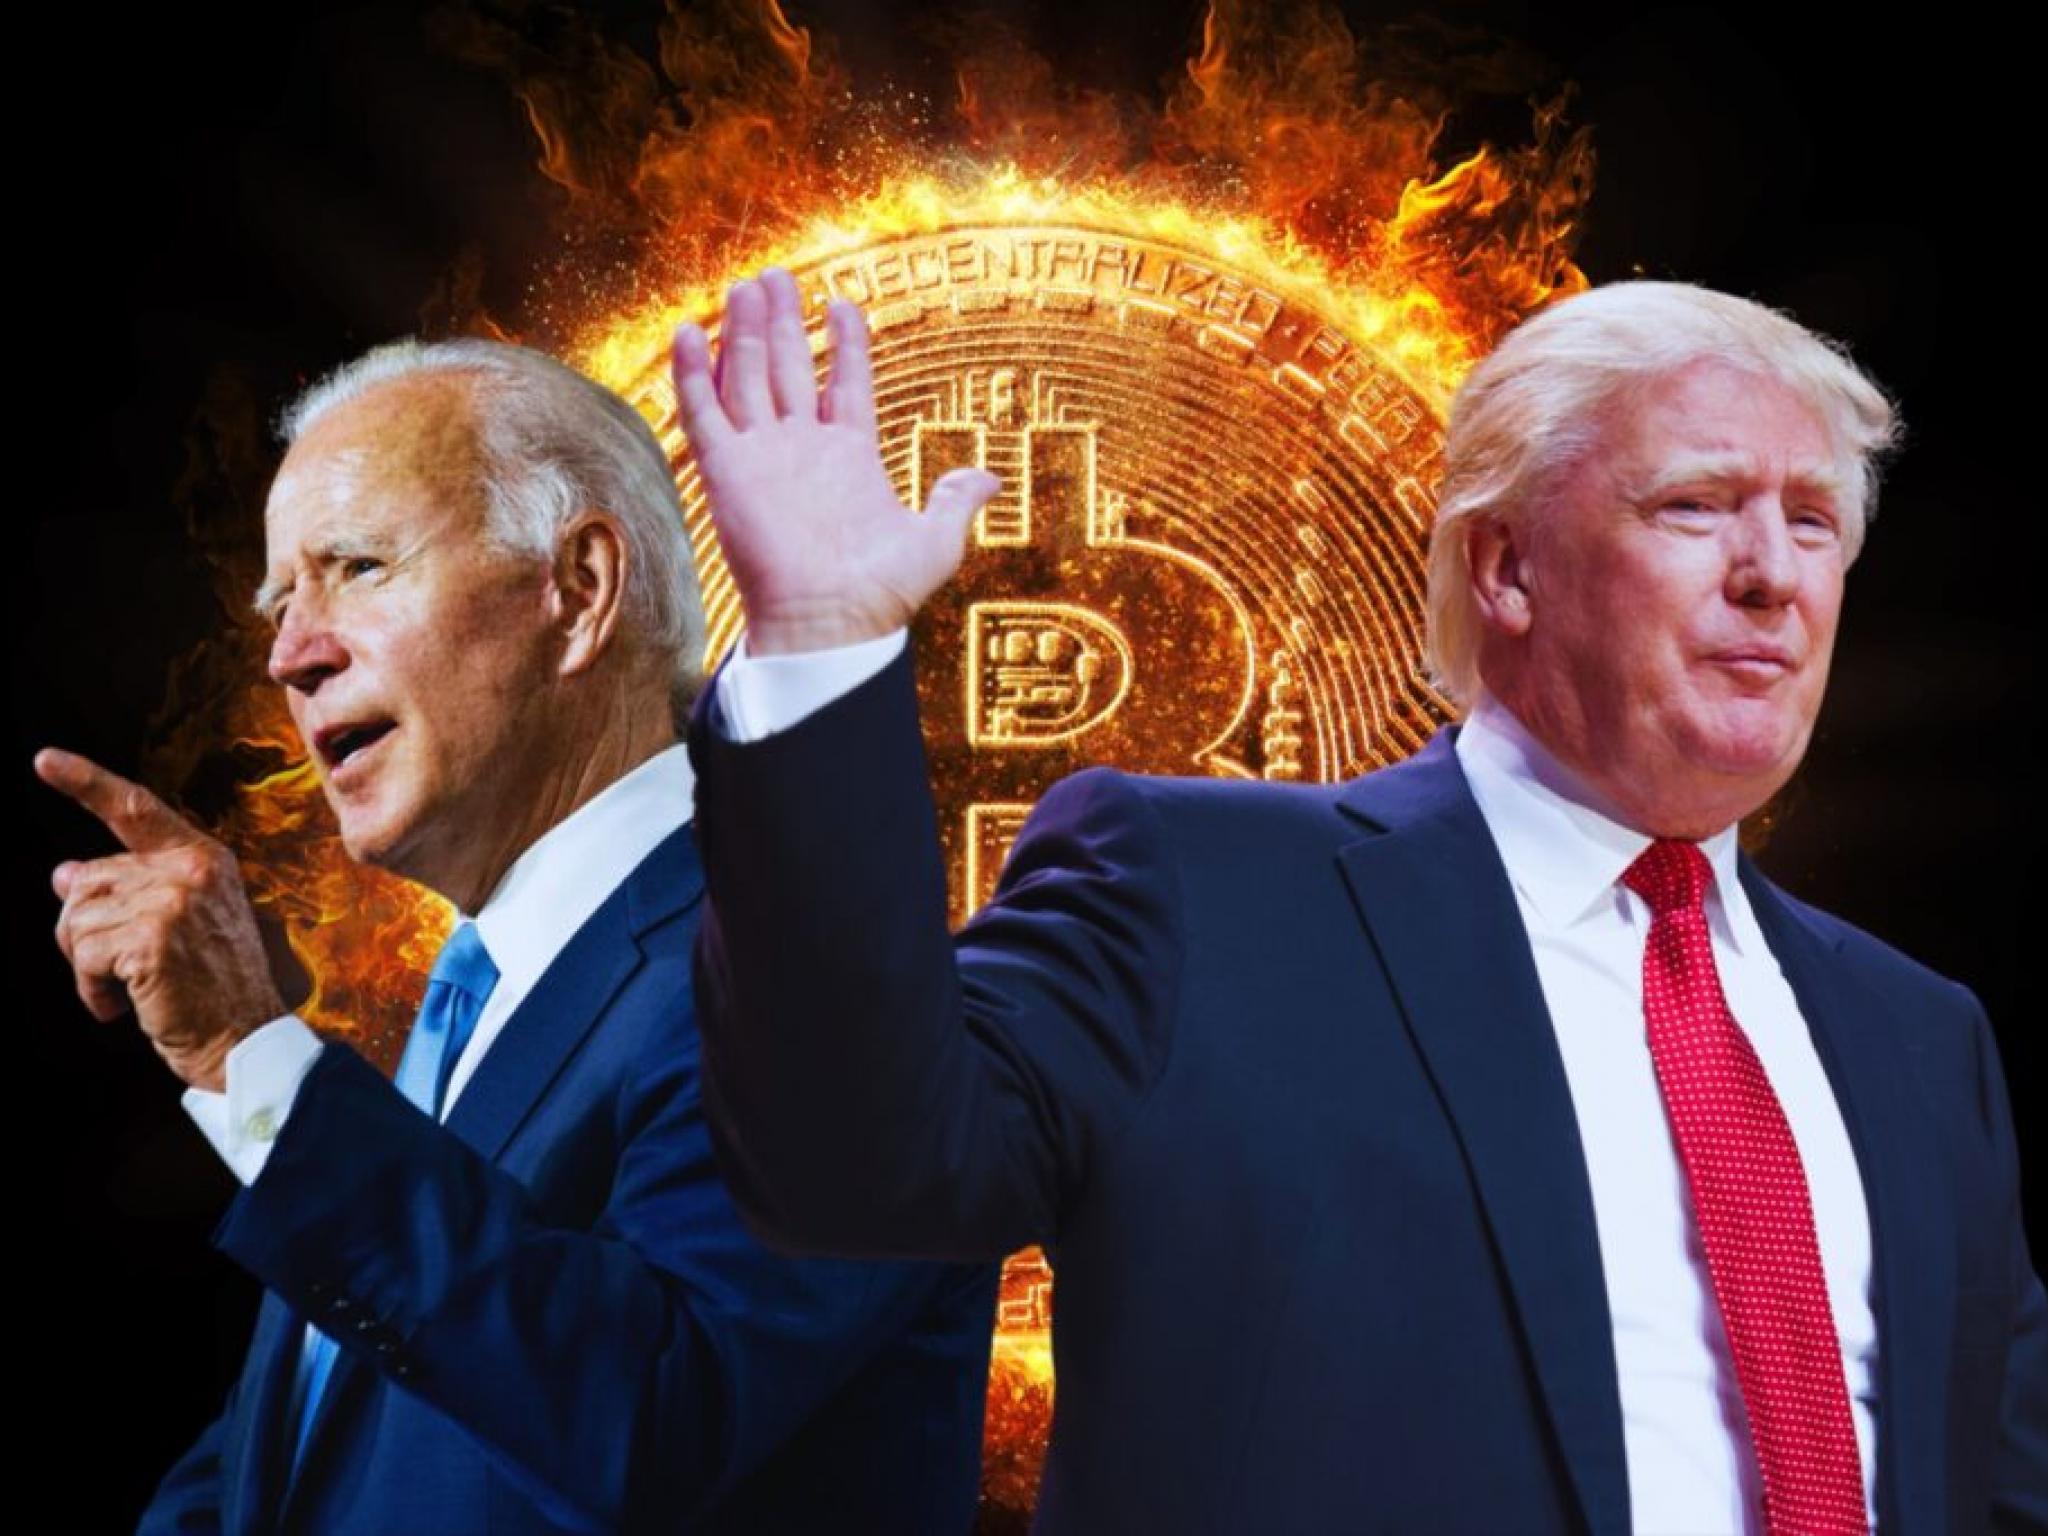  republicans-smell-blood-in-the-water-uniswap-ceo-warns-democrats-of-swing-states-level-miscalculation-on-crypto 